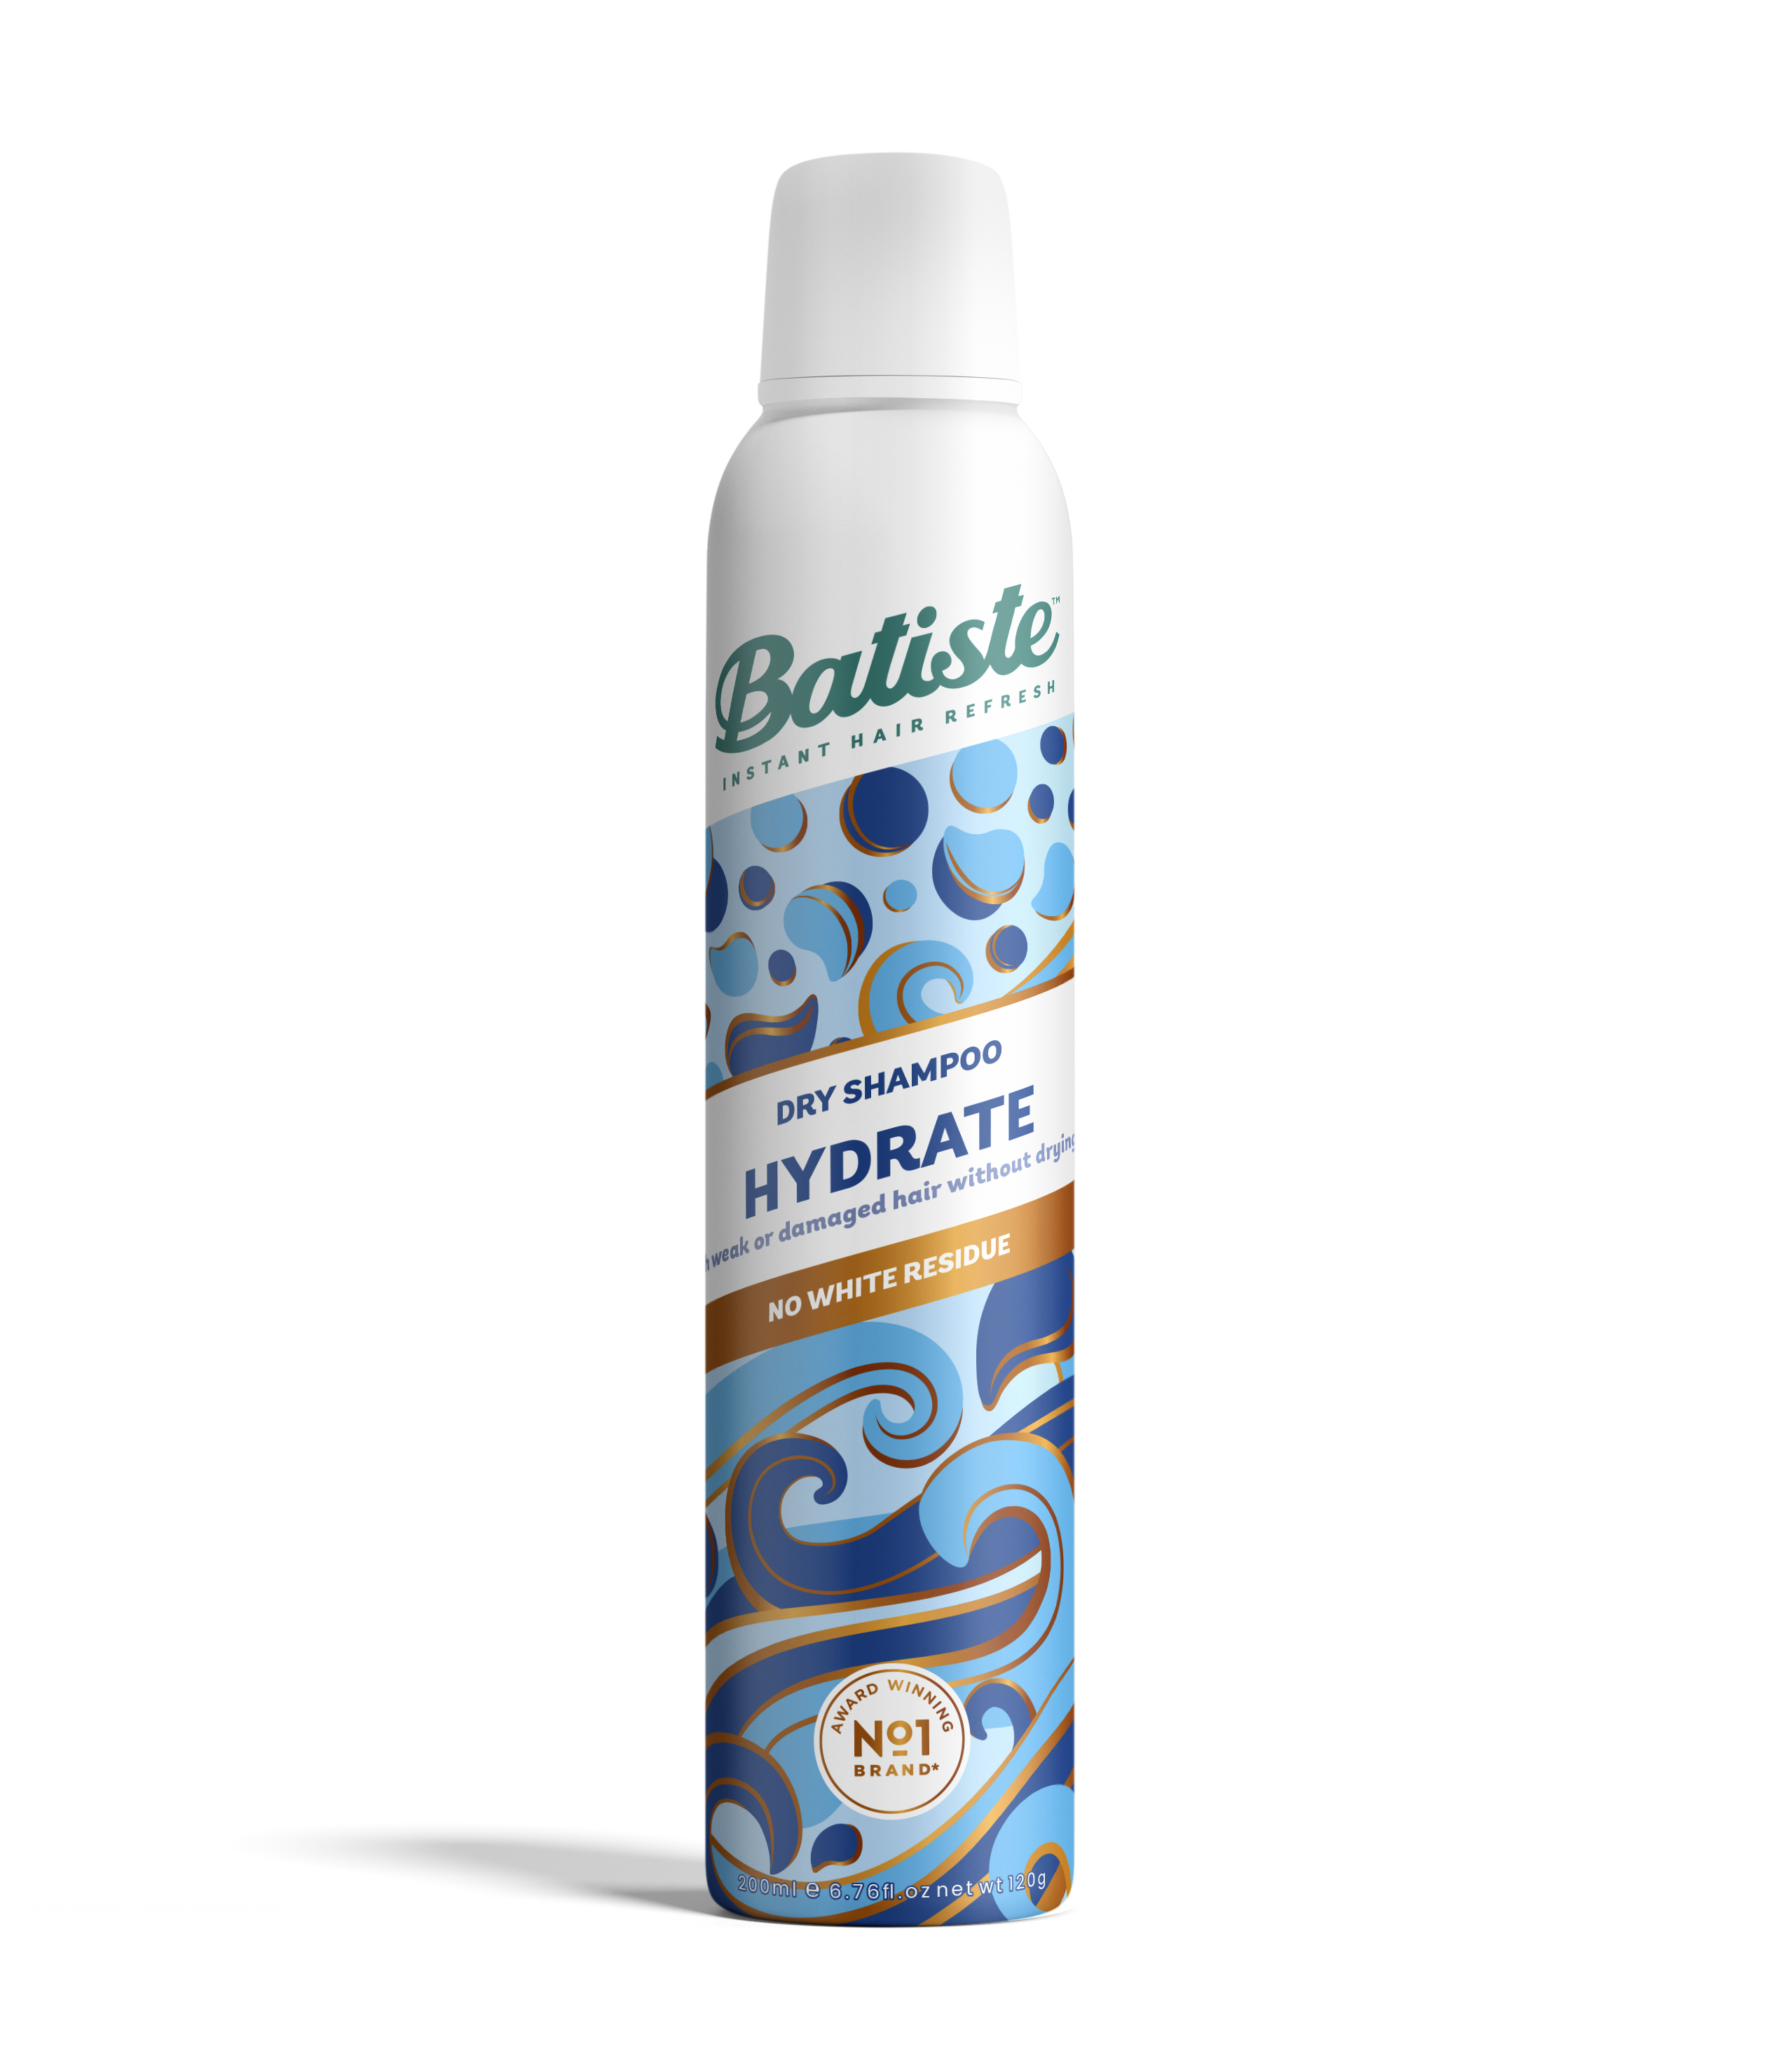 Batiste Dry Shampoo Up to 60% Off | UAE - Free Delivery